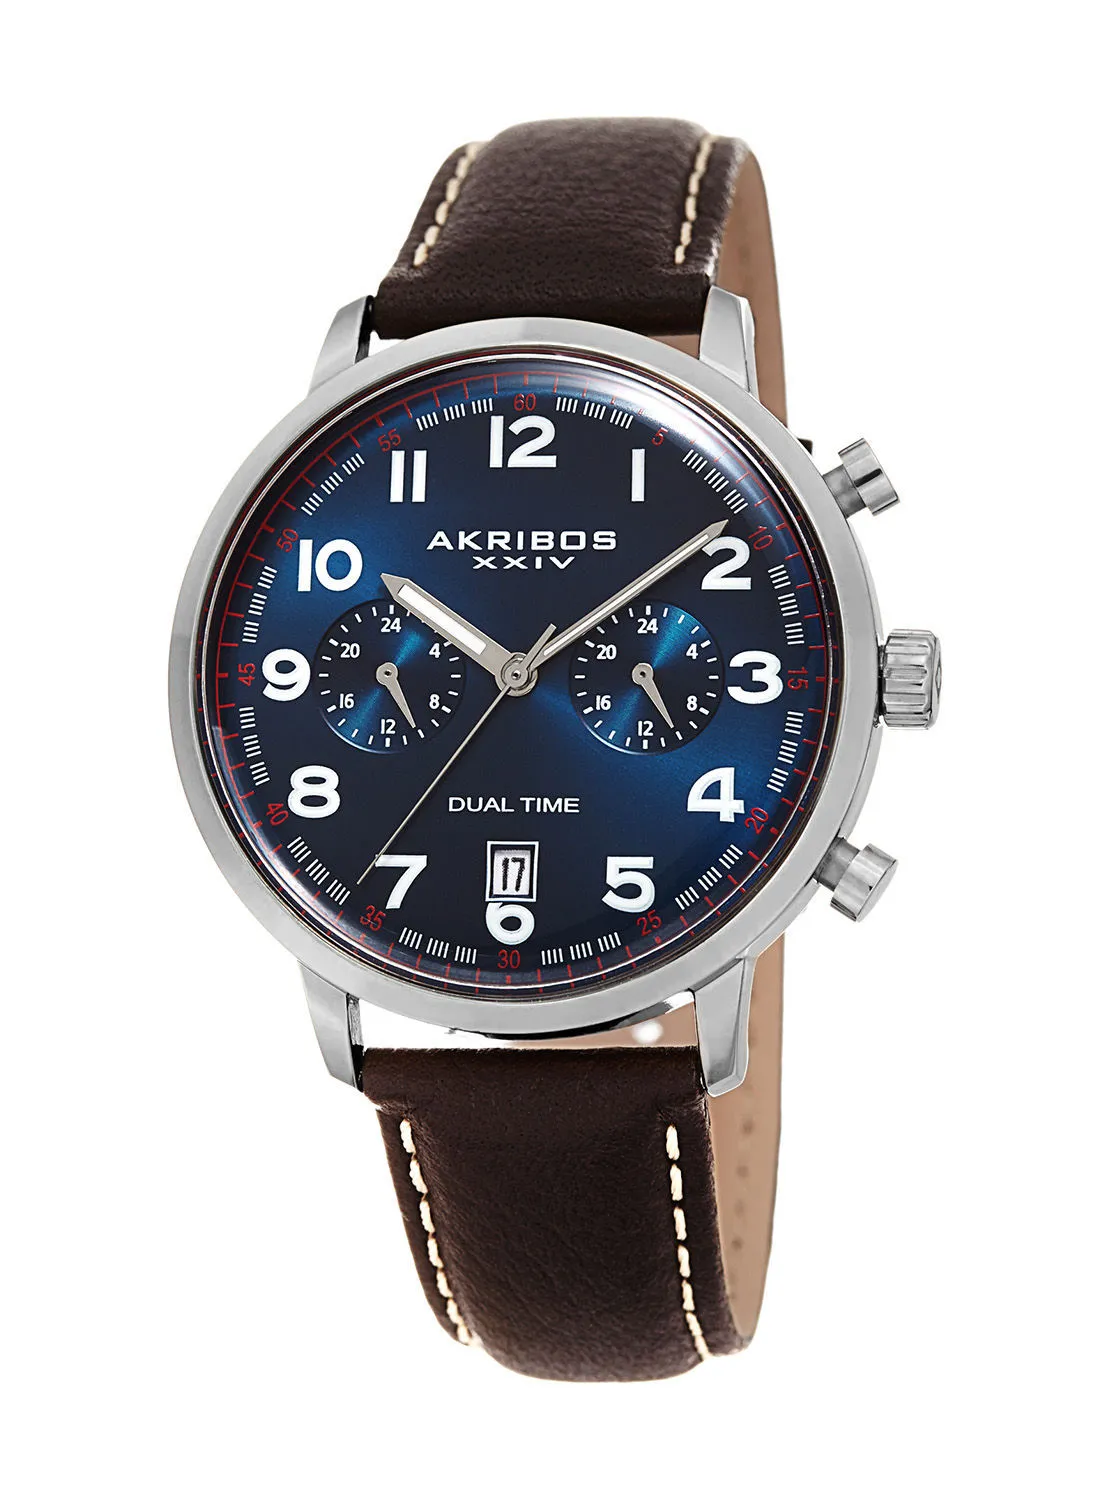 Akribos XXIV Silver Tone Case on Dark Brown Strap, Blue Dial with Silver Tone Hands